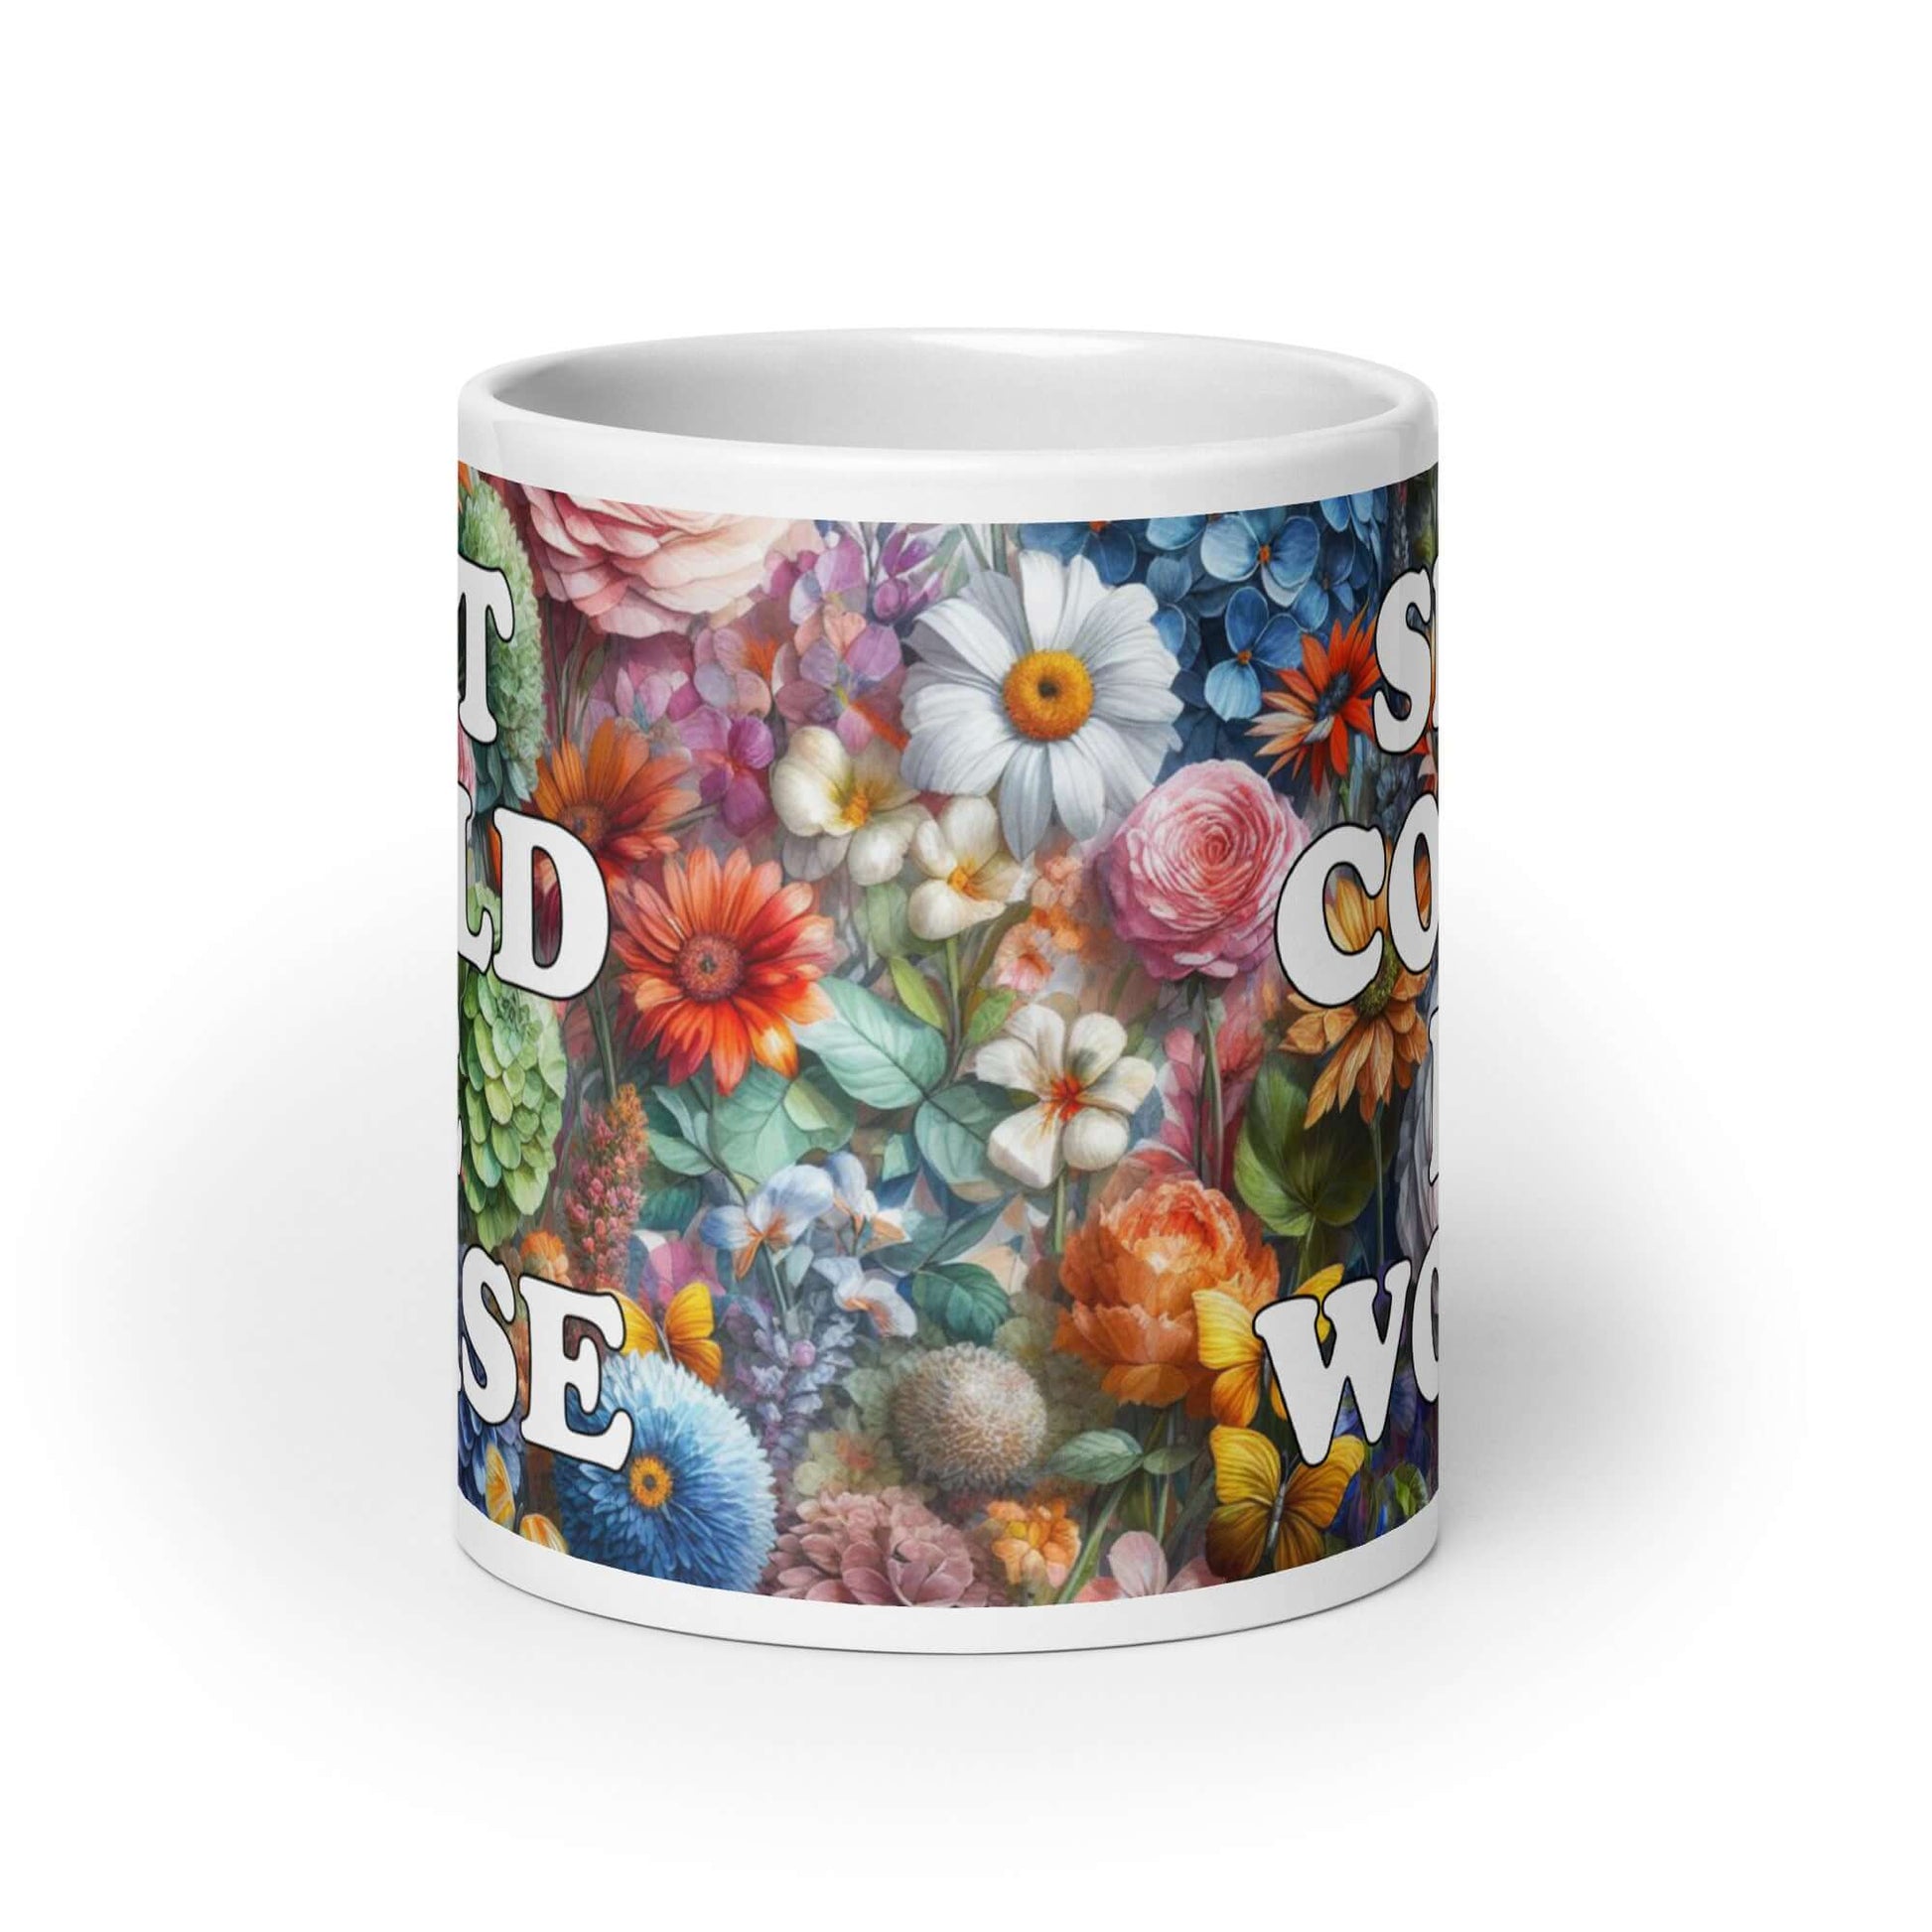 White ceramic mug floral background and the words "Shit could be worse" printed on both sides. 